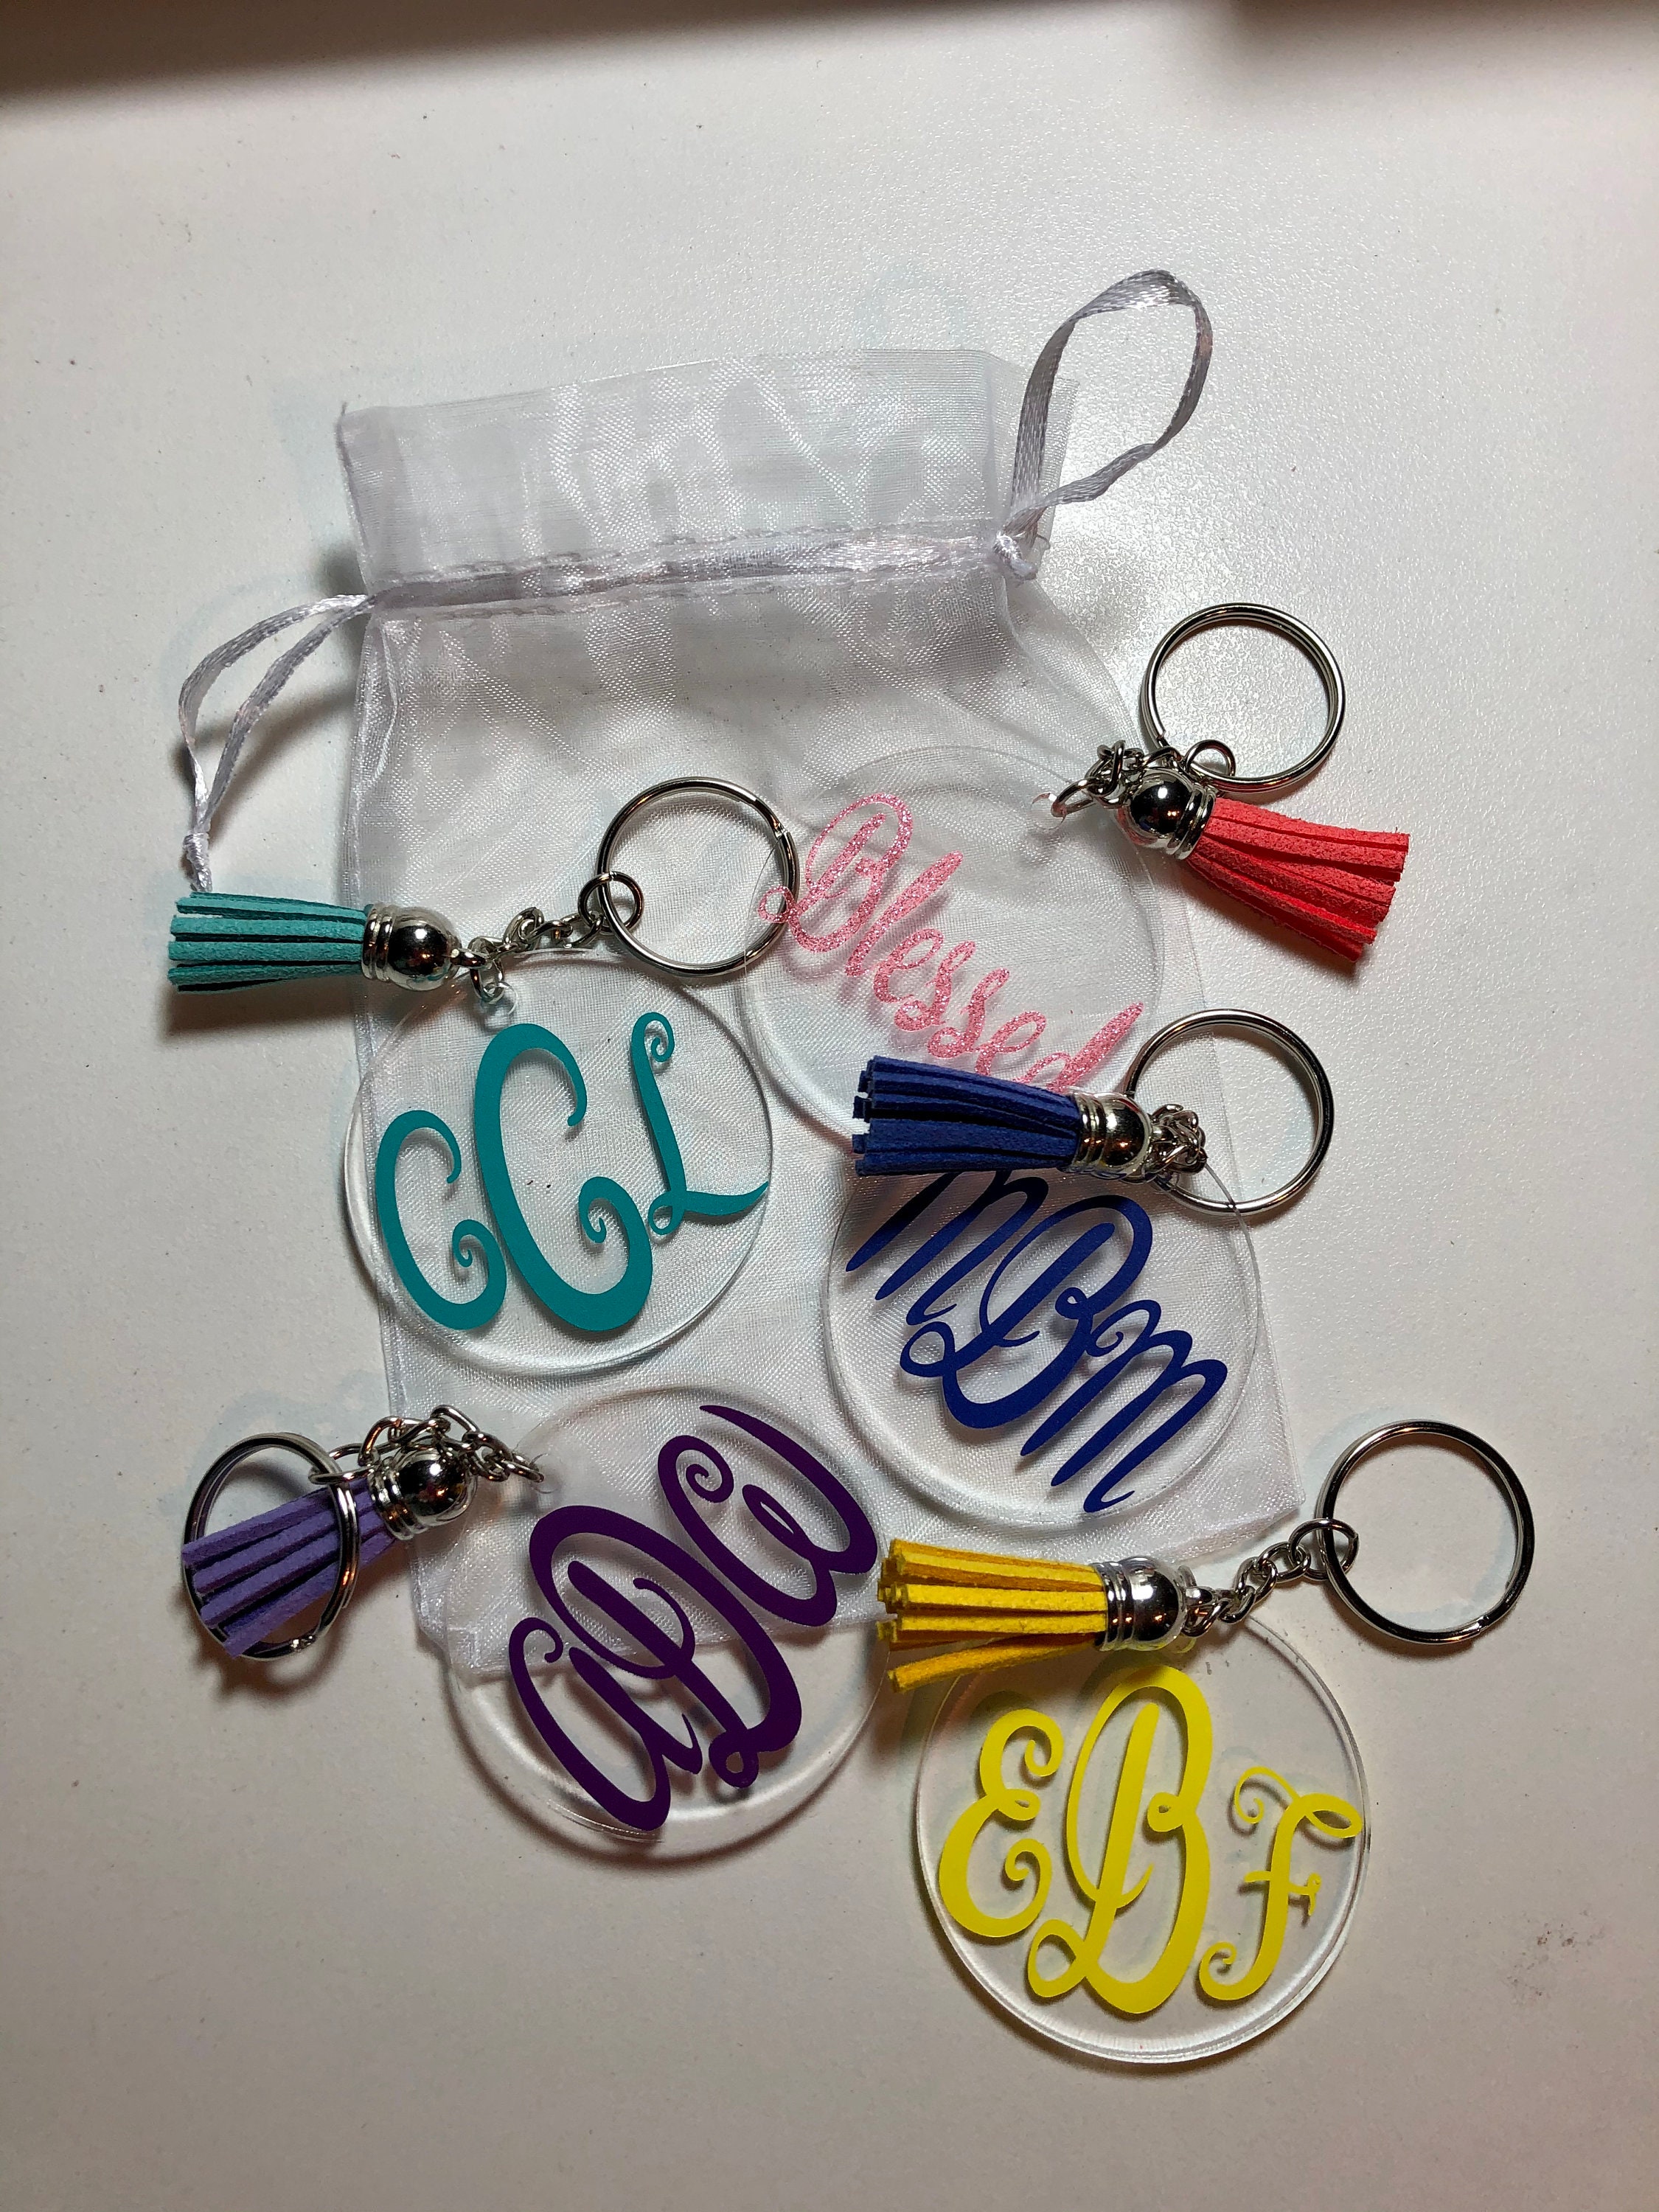 Acrylic Monogrammed Keychain - Variety of Colors